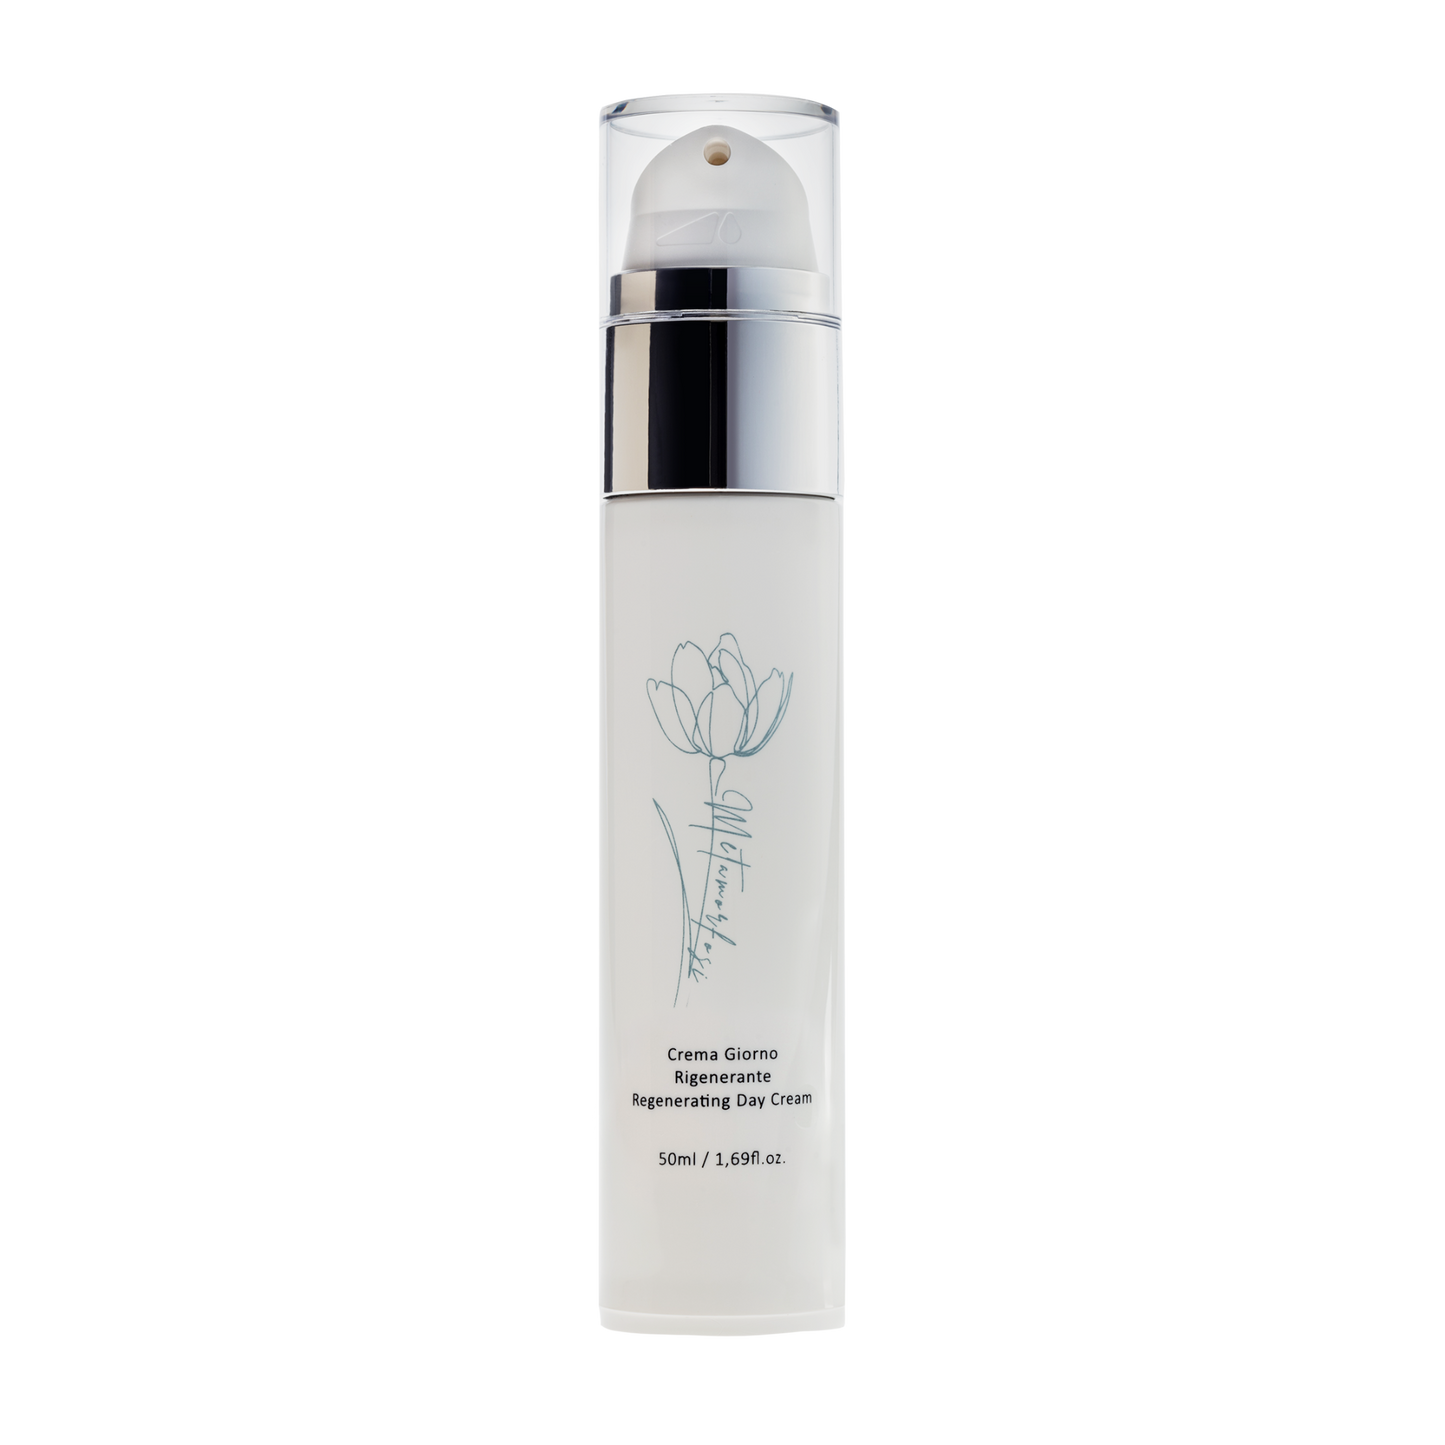 Regenerating Day Cream: Anti-Wrinkle Face Cream Airless Bottle by Metamorfosi Skincare, Made In Italy